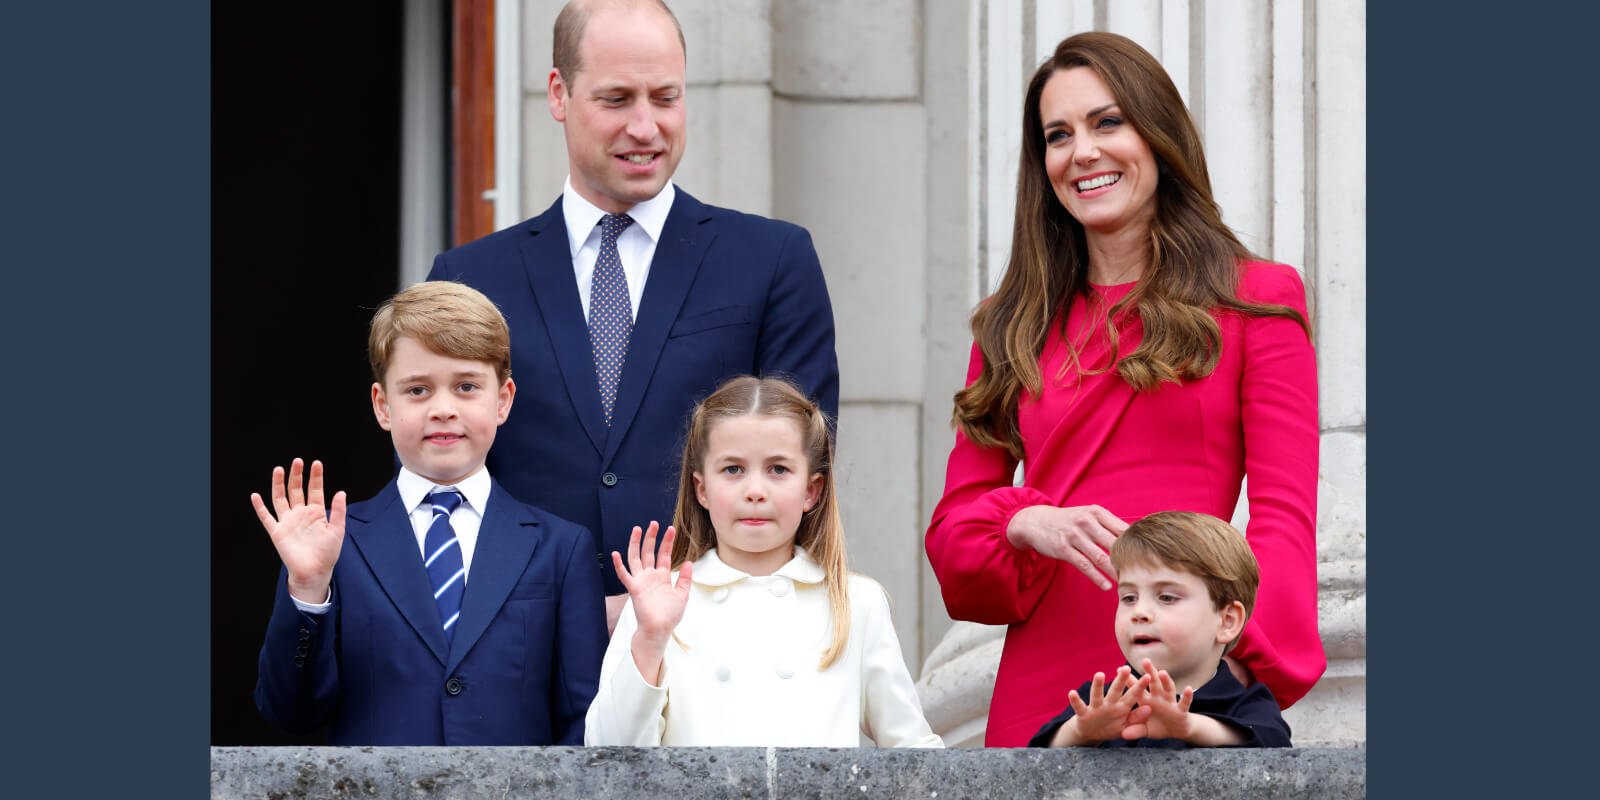 Prince William, Kate Middleton, Prince George, Princess Charlotte and Prince Louis on the Buckingham Palace balcony in 2022.